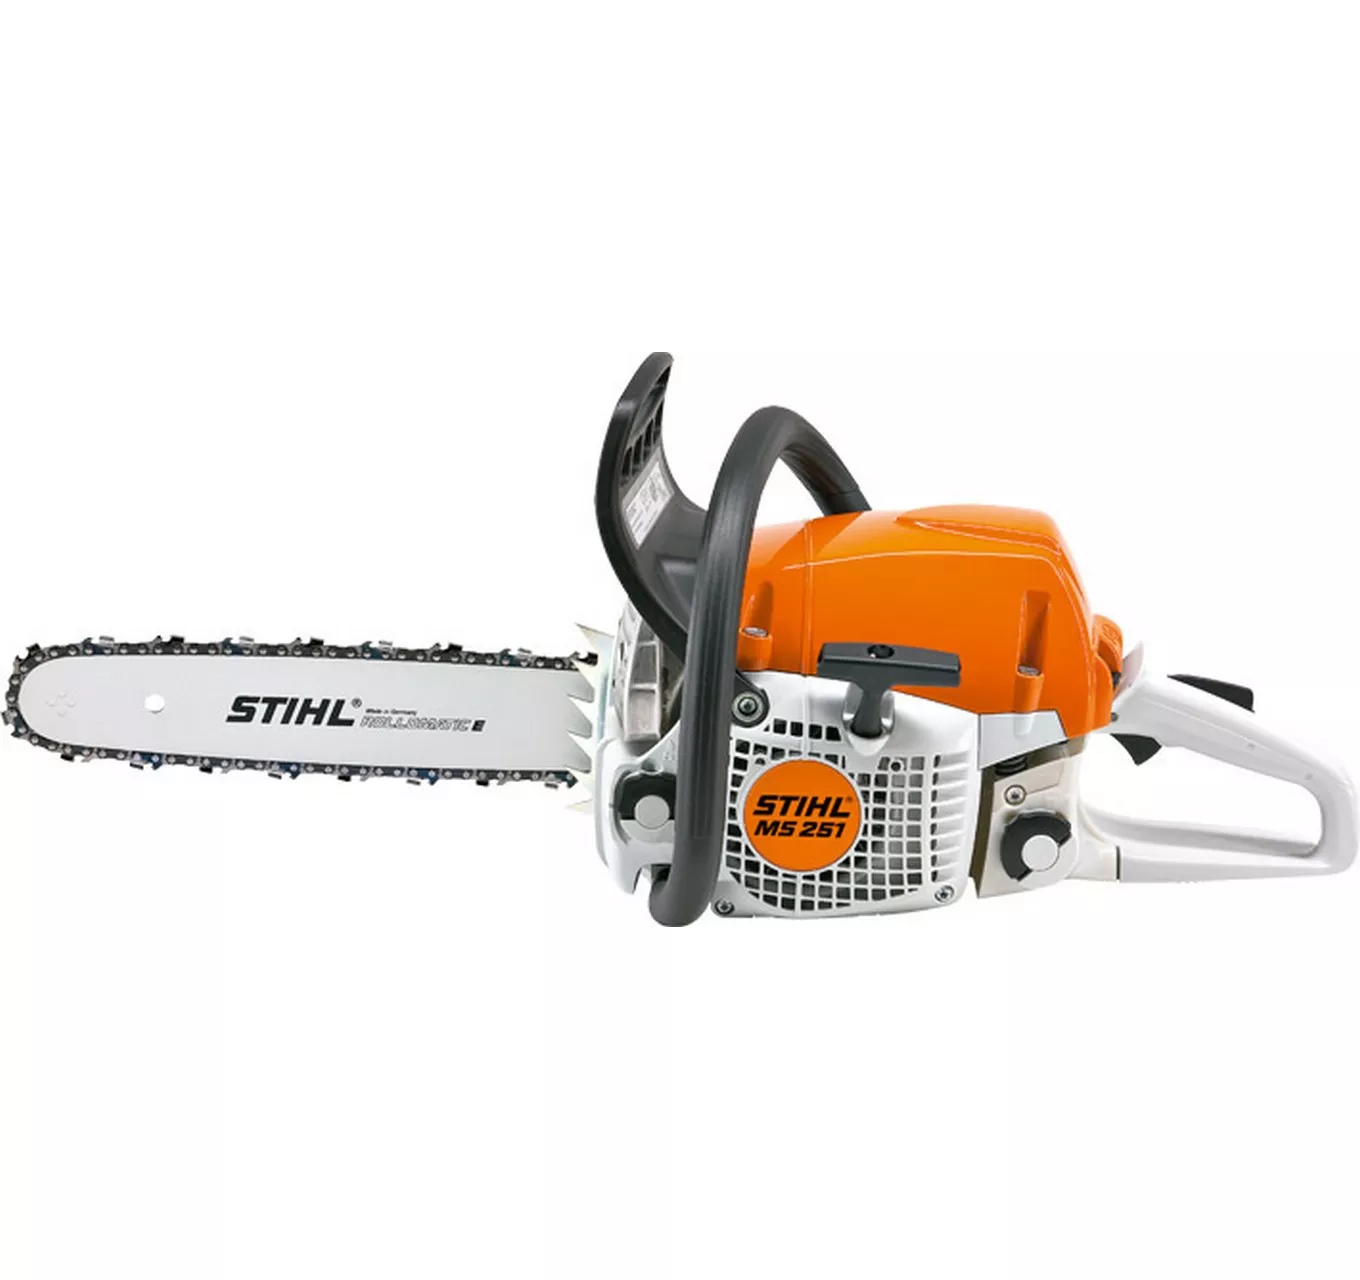 MS 251 Chainsaw 18"